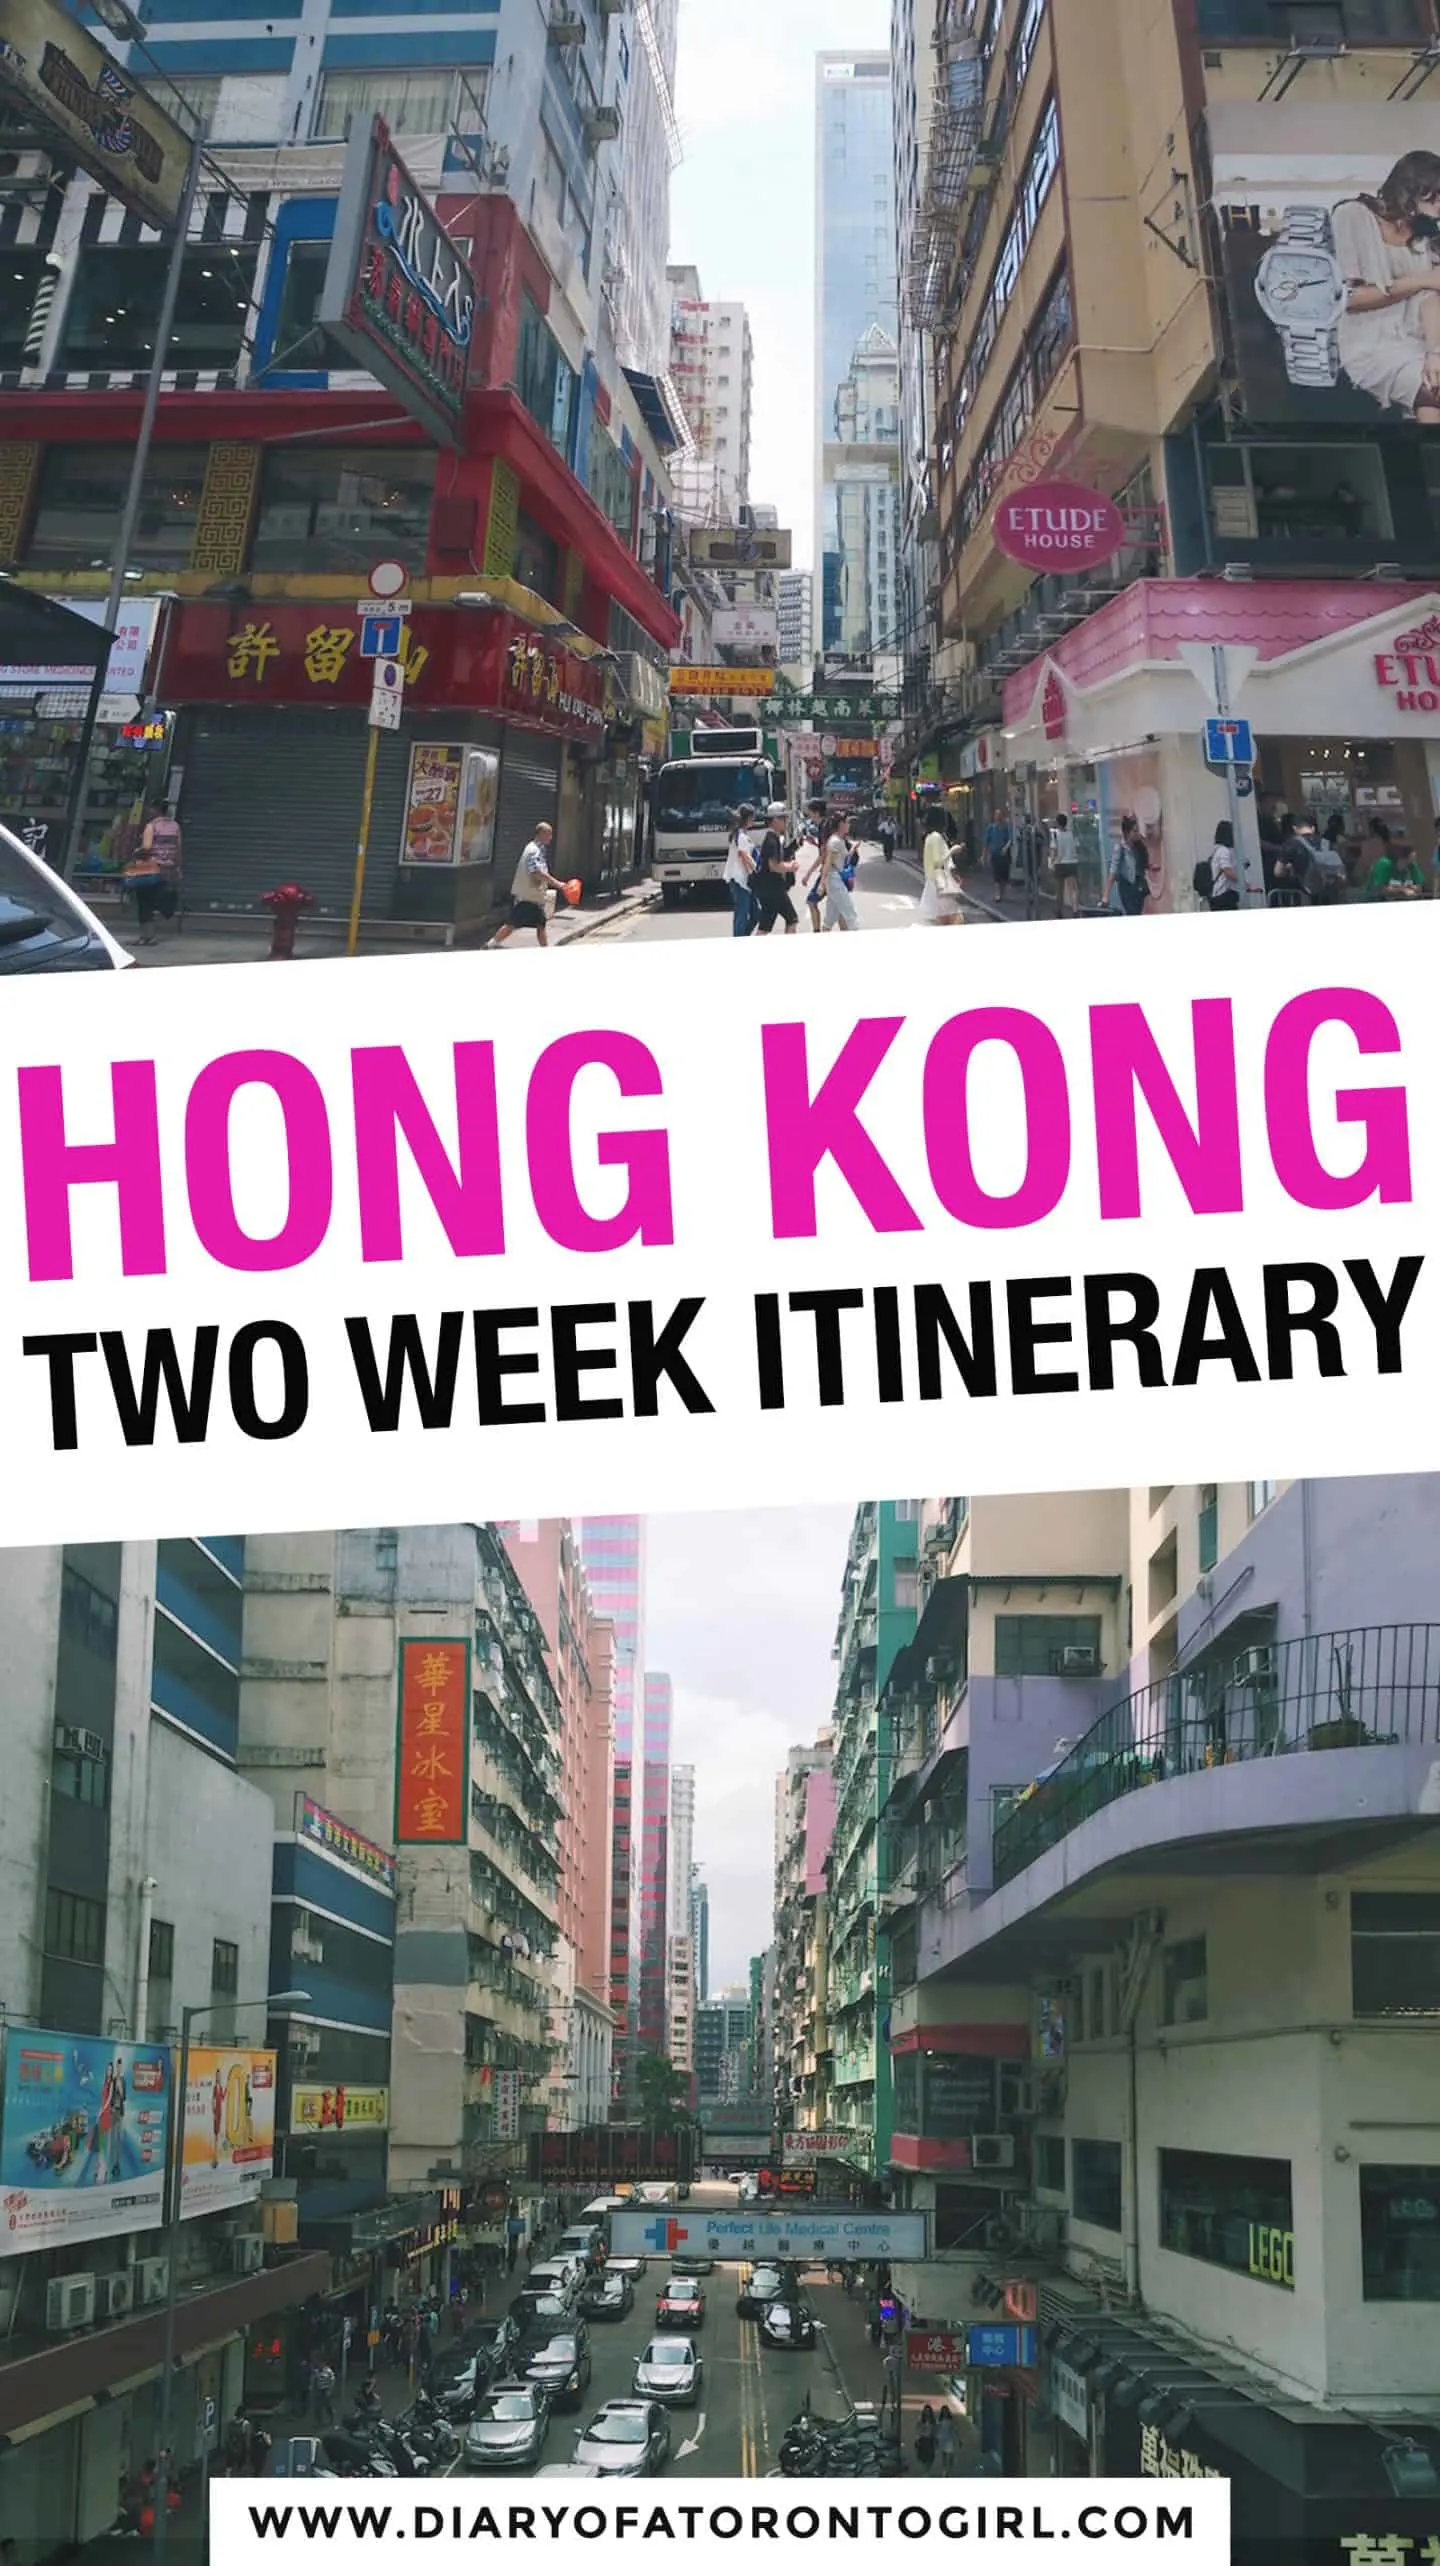 Planning a visit to Hong Kong? Here's the ultimate travel itinerary and guide featuring the best things to do and see during your trip!